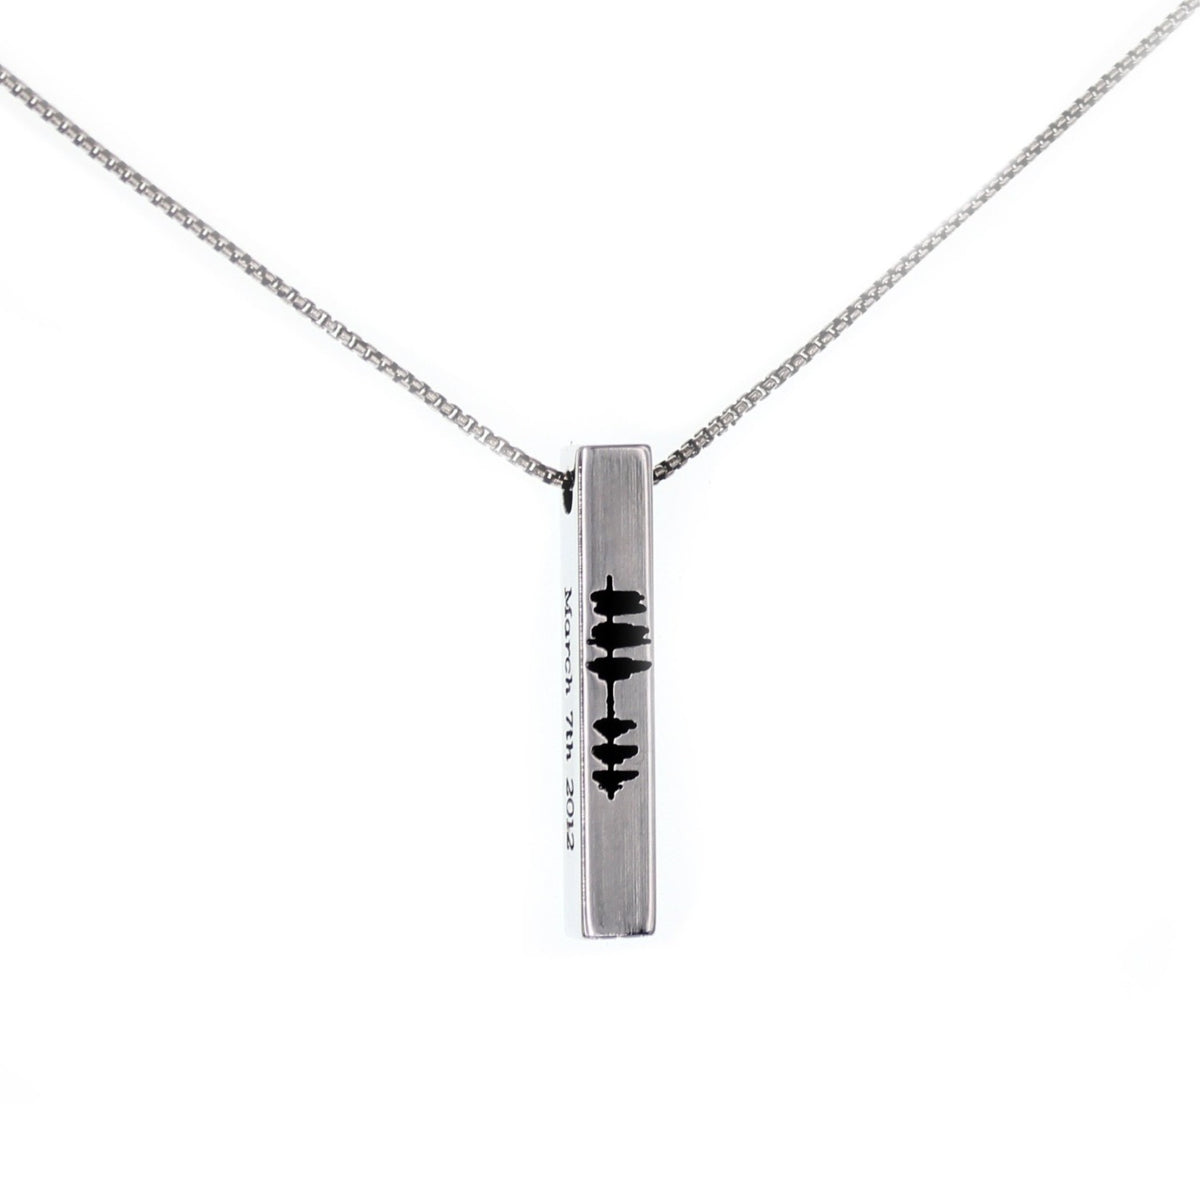 Sound Wave Vertical Bar Necklace - Silver Tone - Love It Personalized